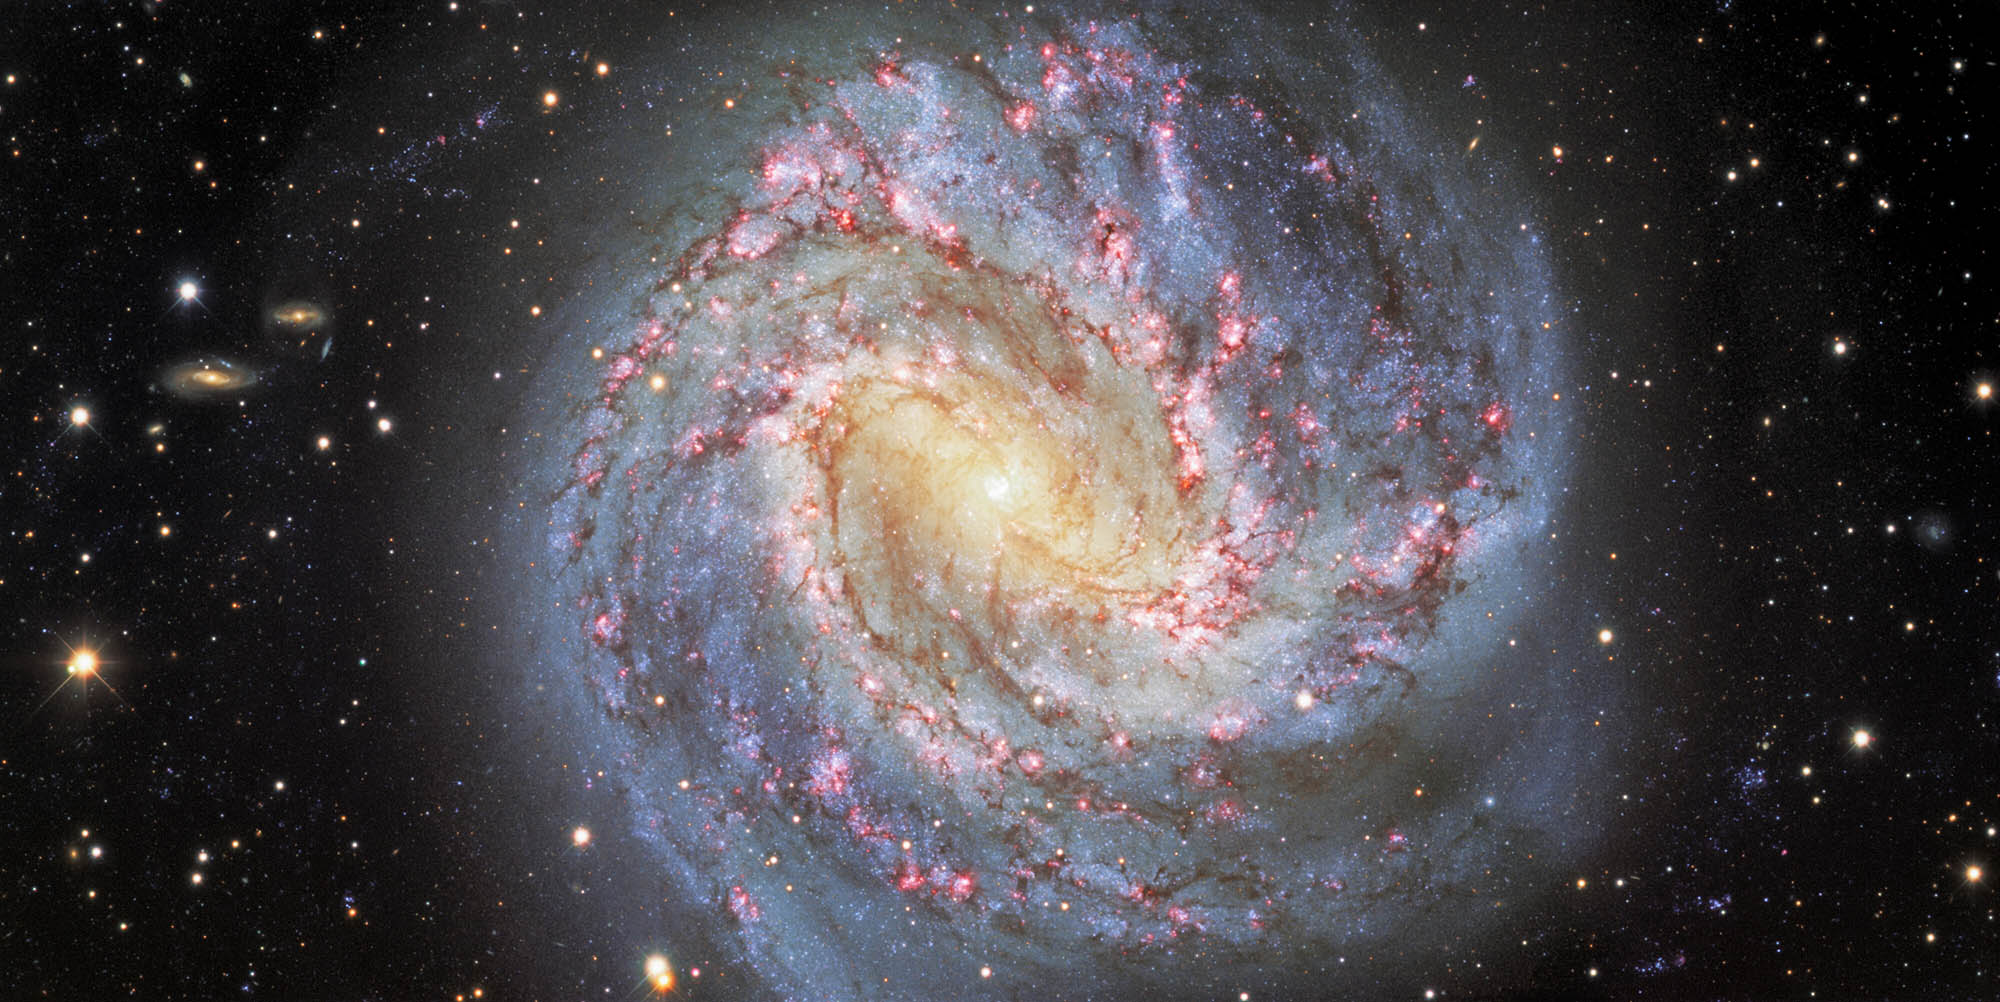 Nicknamed the Southern Pinwheel, Messier 83 (or NGC 5236) is a stunning face-on spiral galaxy located about 15 million light-years away in the southern constellation of Hydra. 